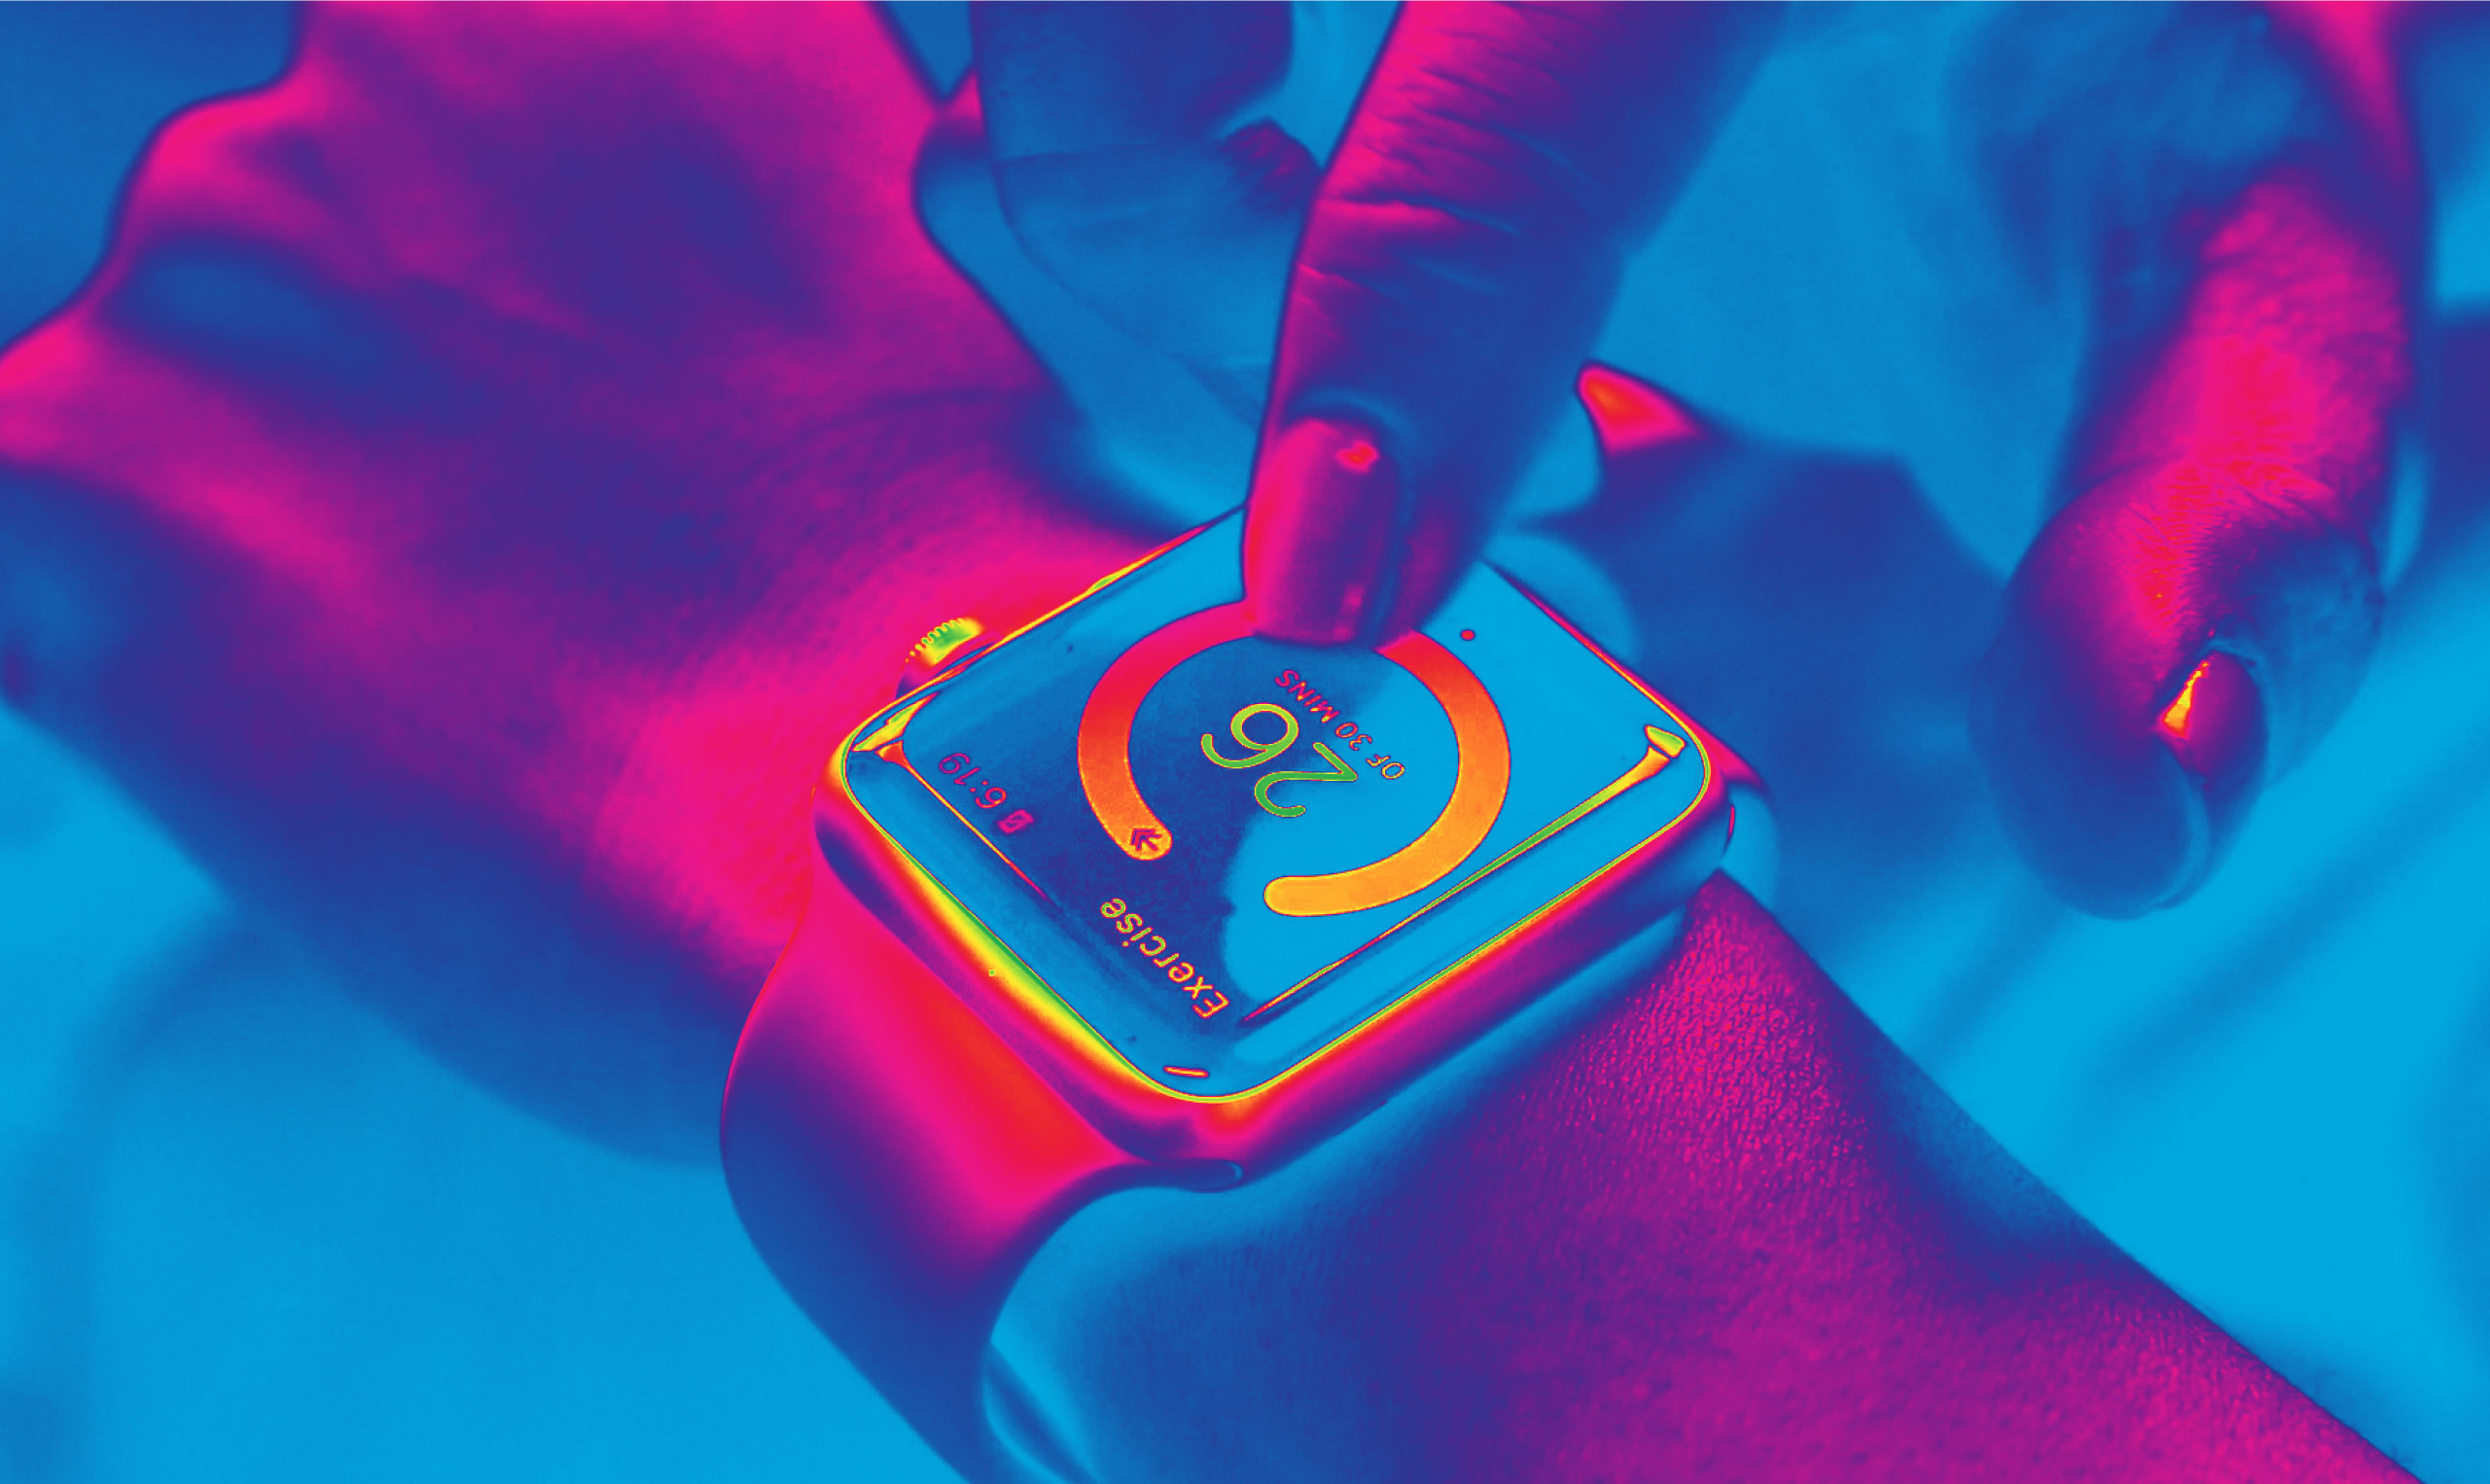 A person holding an apple watch in front of a colorful background.